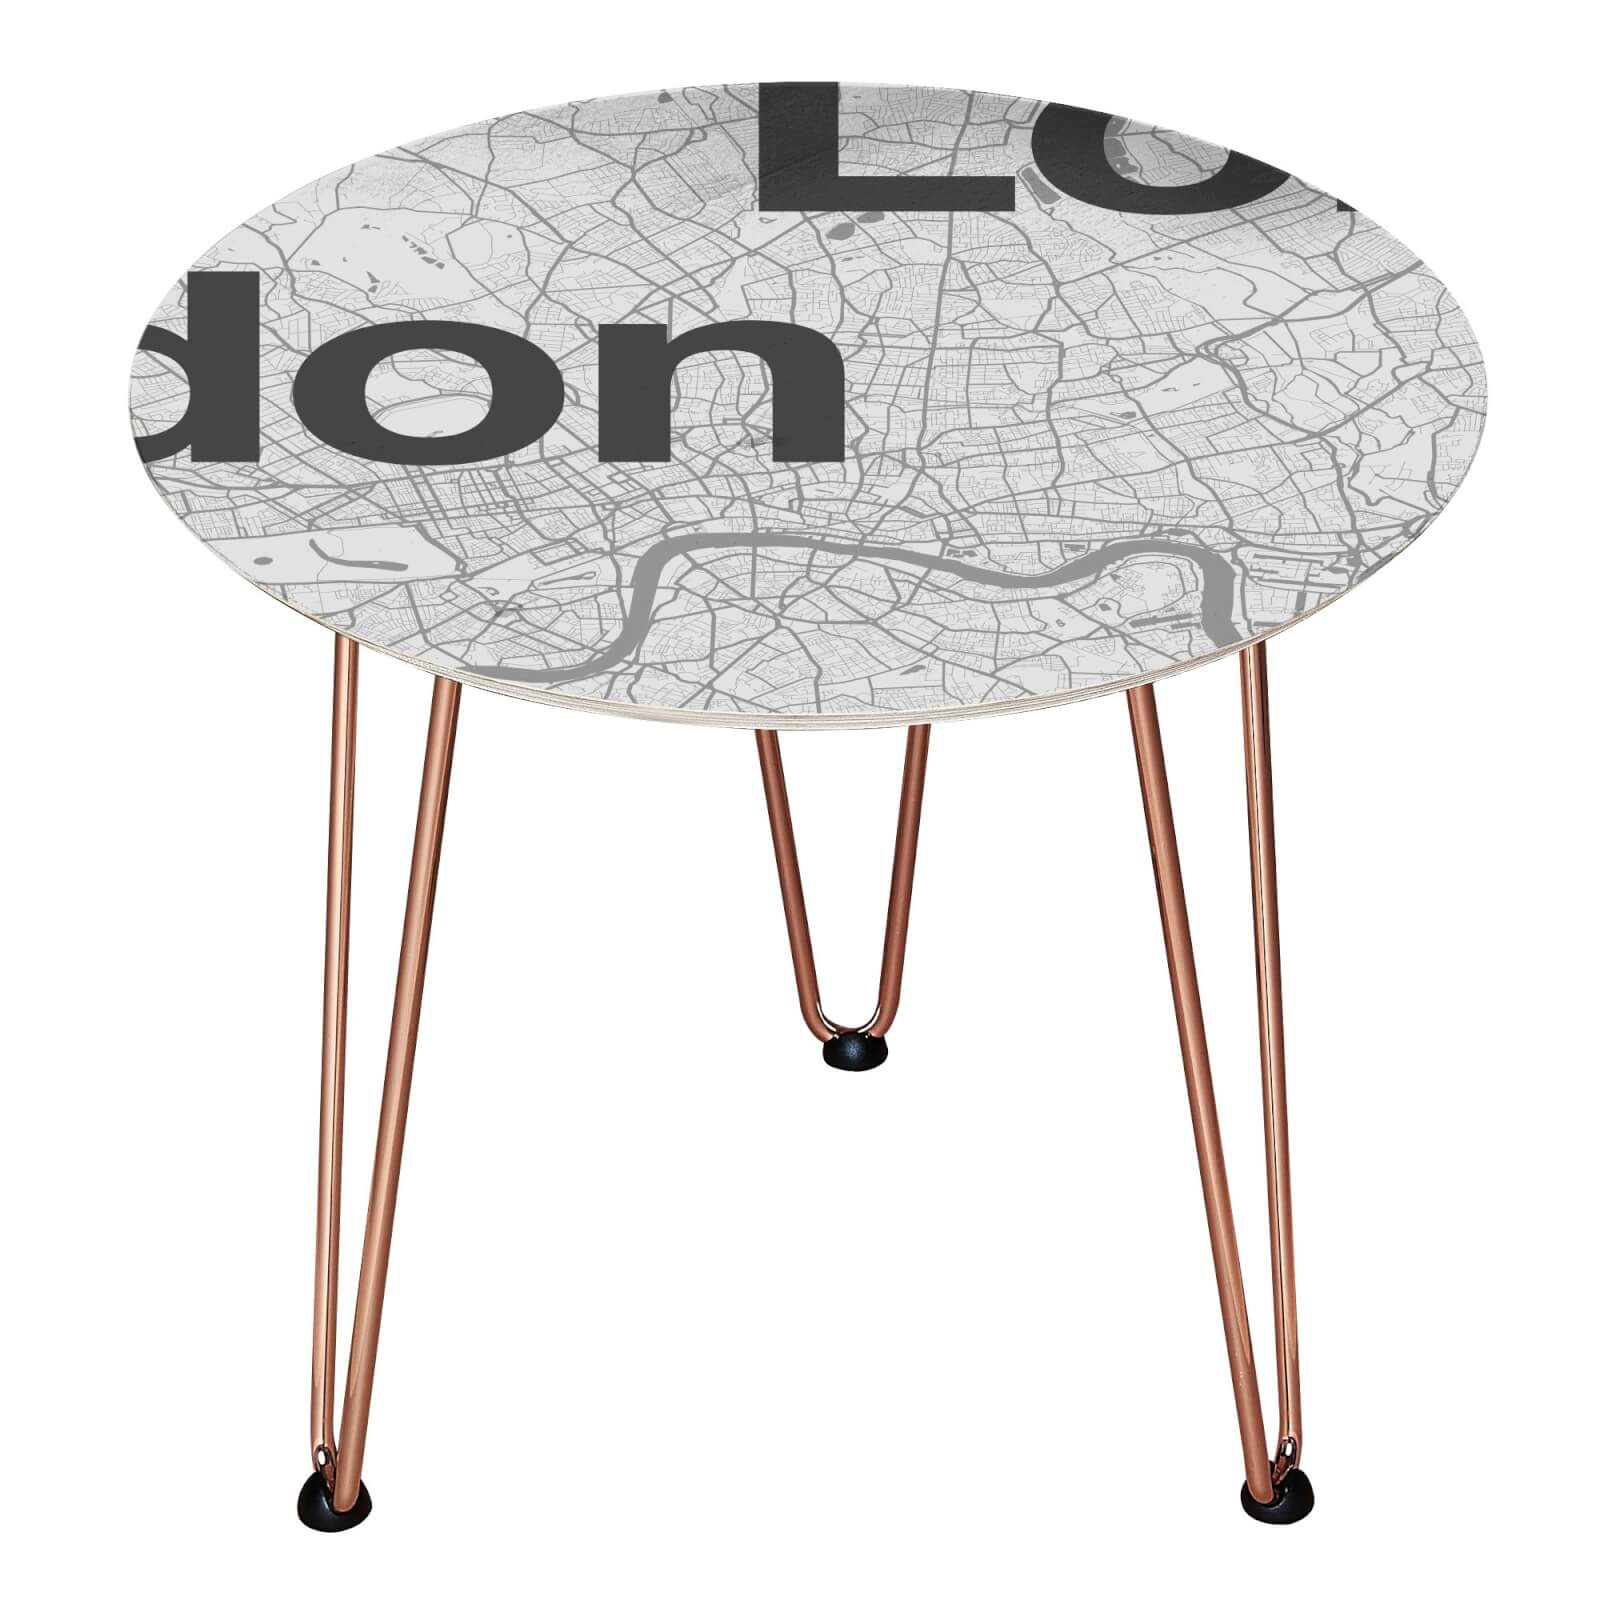 London Minimalist Map Wooden Side Table - Rose gold